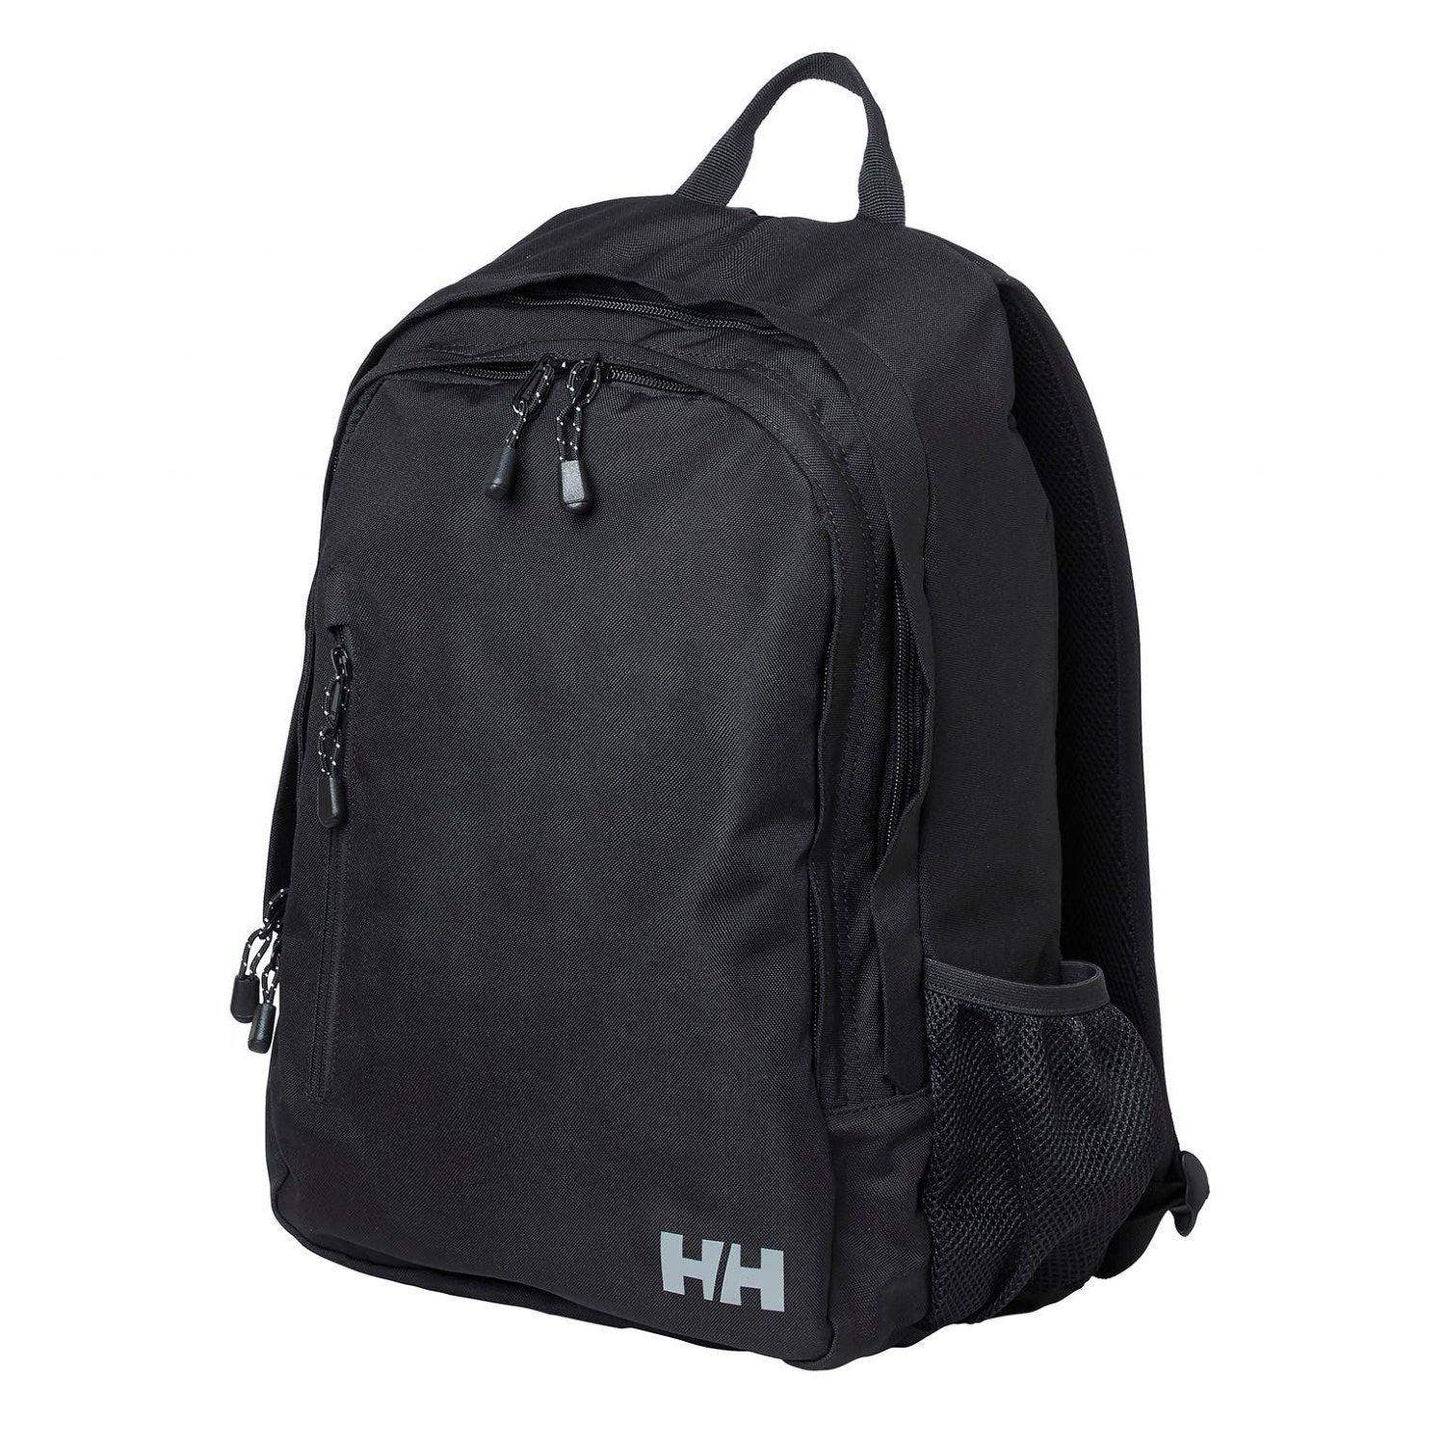 Dublin Day Pack by Helly Hansen - The Luxury Promotional Gifts Company Limited